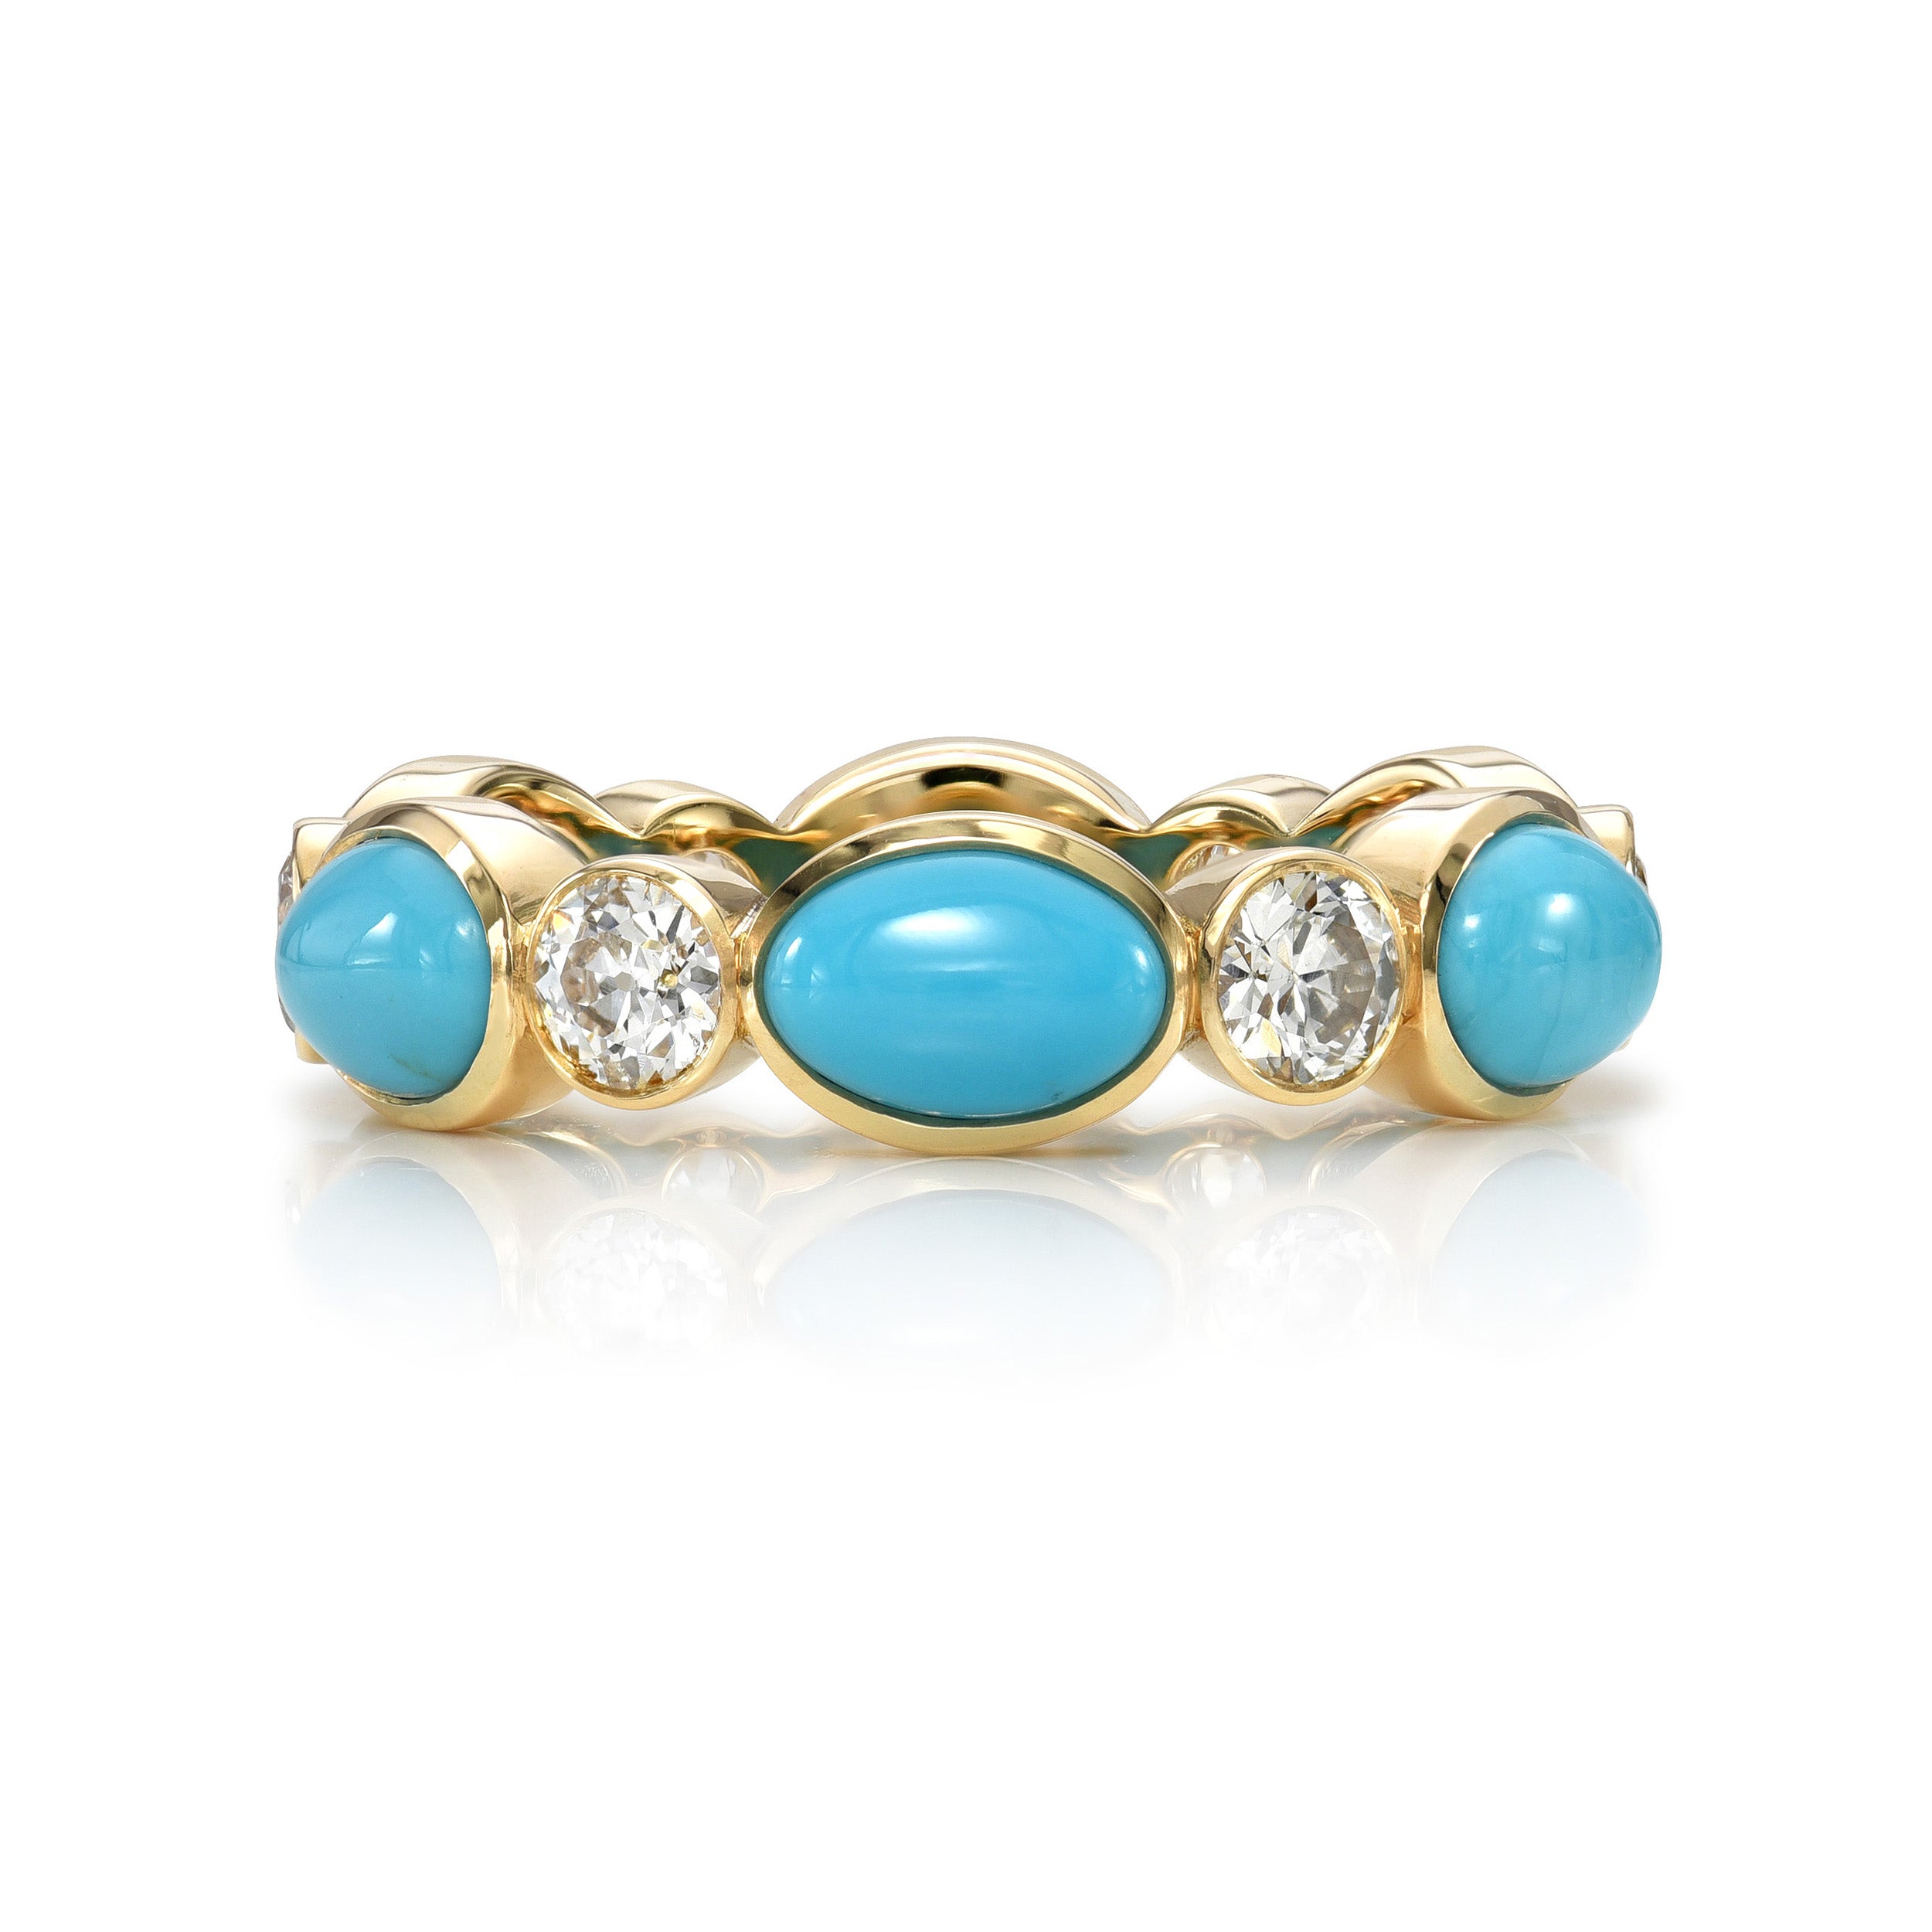 SINGLE STONE QUINN BAND | Approximately 0.90ctw G-H/VS-SI old European cut diamonds and alternating natural oval turquoise cabochons set in a handcrafted 18K gold eternity band. Approximate band width 5mm. Please inquire for additional customization.